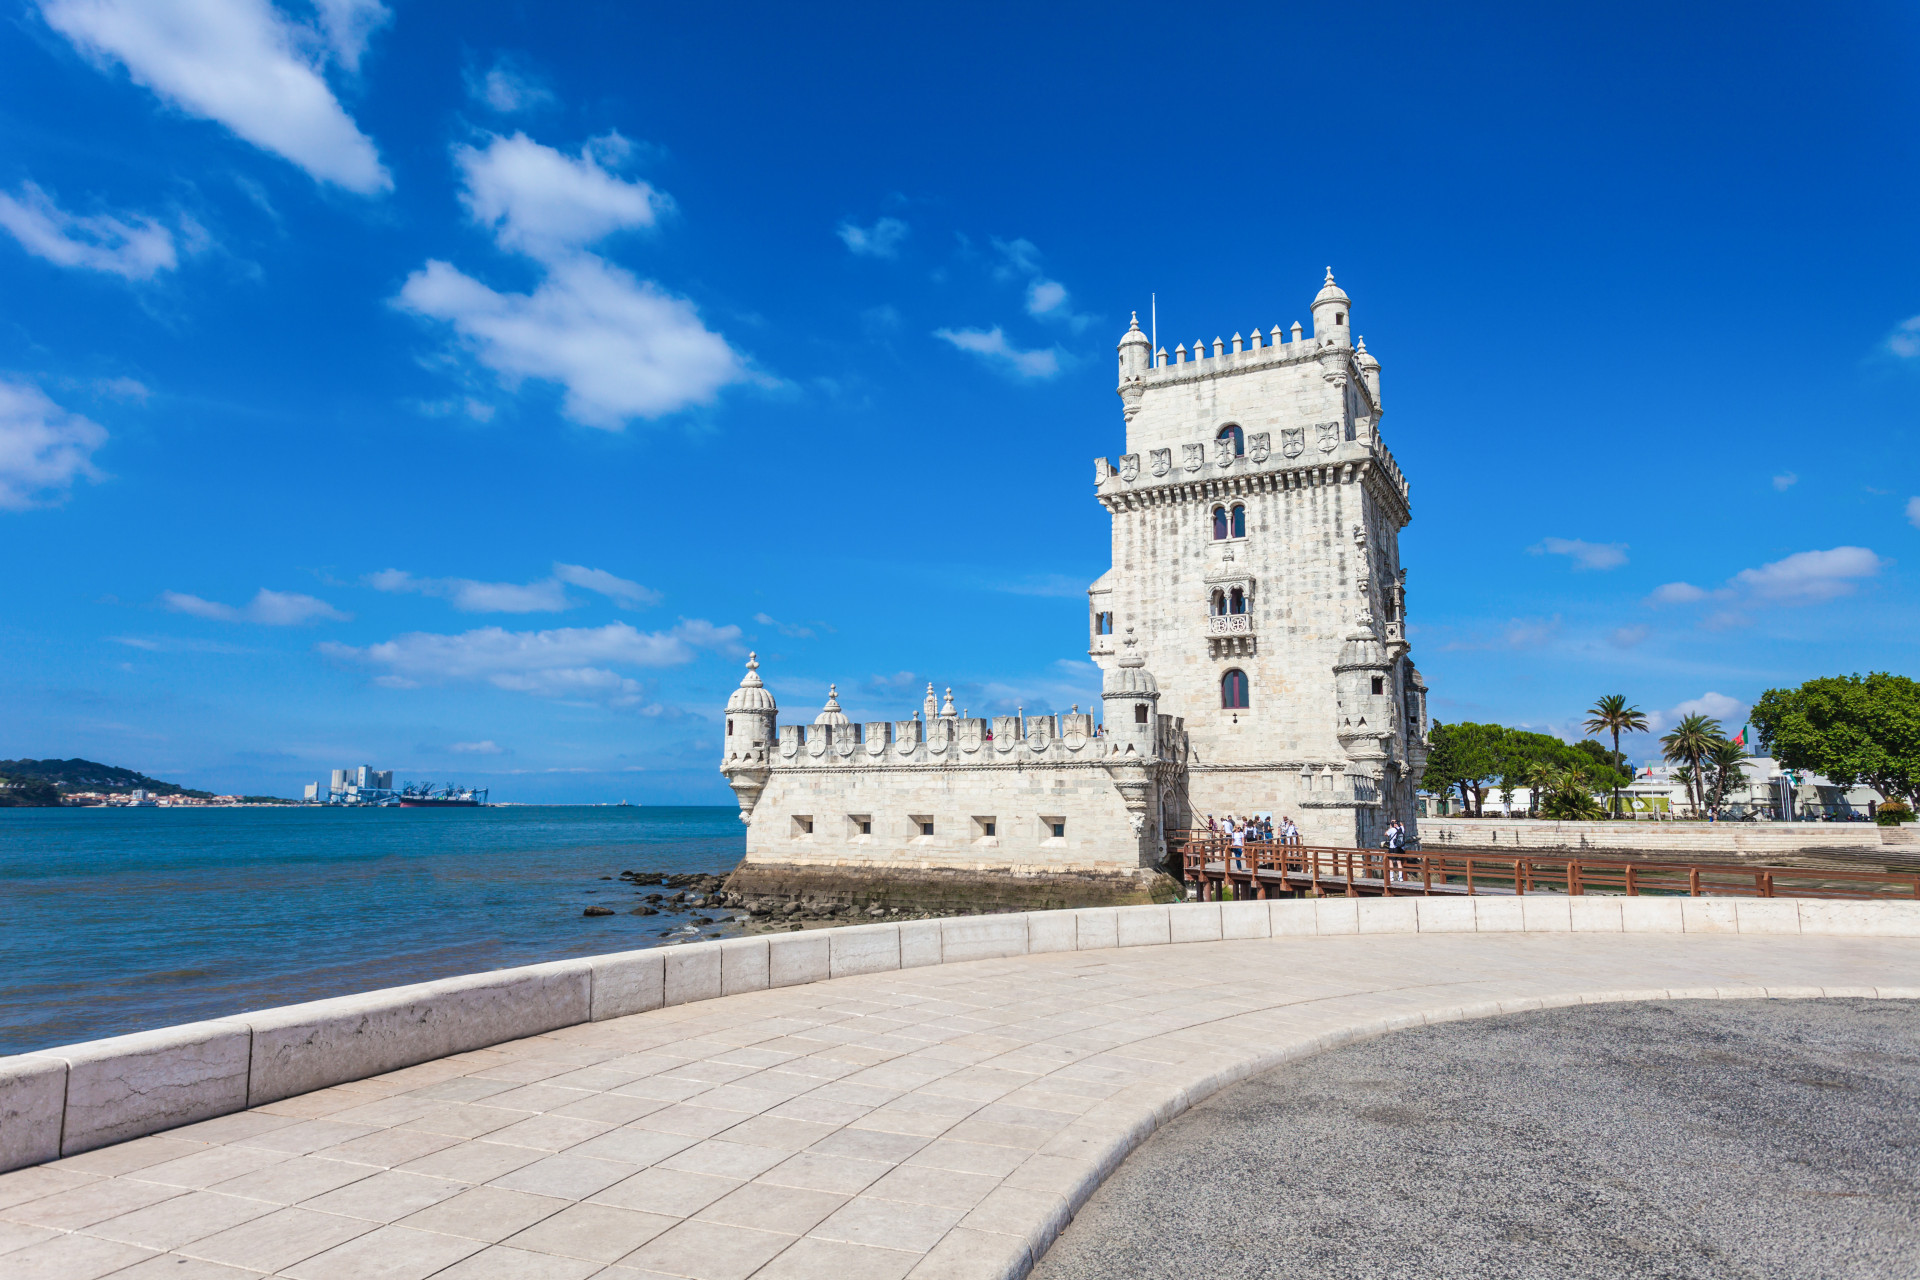 In Belém, you can visit the Padrão dos Descobrimentos (Monument to the Discoveries), Jerónimos Monastery, and the Tower of Belém, all within walking distance of one another.<p>You may also like:<a href="https://www.starsinsider.com/n/207500?utm_source=msn.com&utm_medium=display&utm_campaign=referral_description&utm_content=208346v2en-sg"> Unveiling the shadows: America's infamous killers who haunt history</a></p>